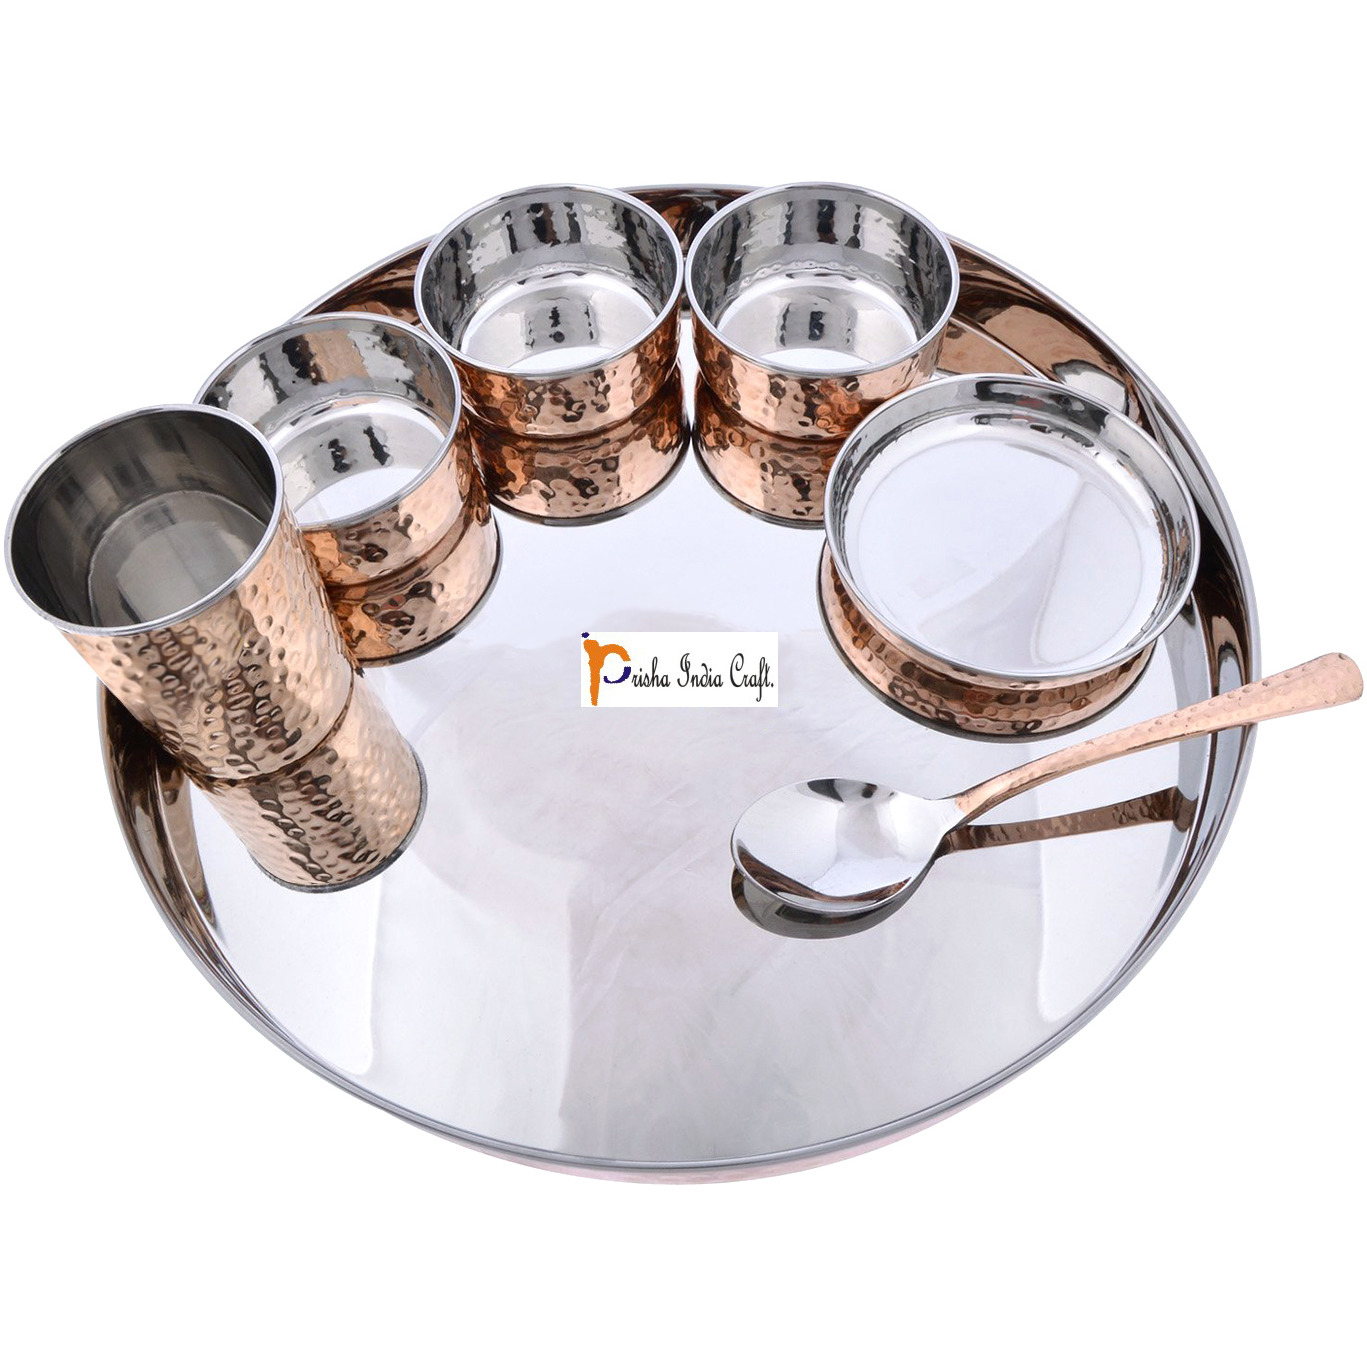 Prisha India Craft B. Set of 2 Dinnerware Traditional Stainless Steel Copper Dinner Set of Thali Plate, Bowls, Glass and Spoon, Dia 13  With 1 Luxury Style Pitcher Jug - Christmas Gift